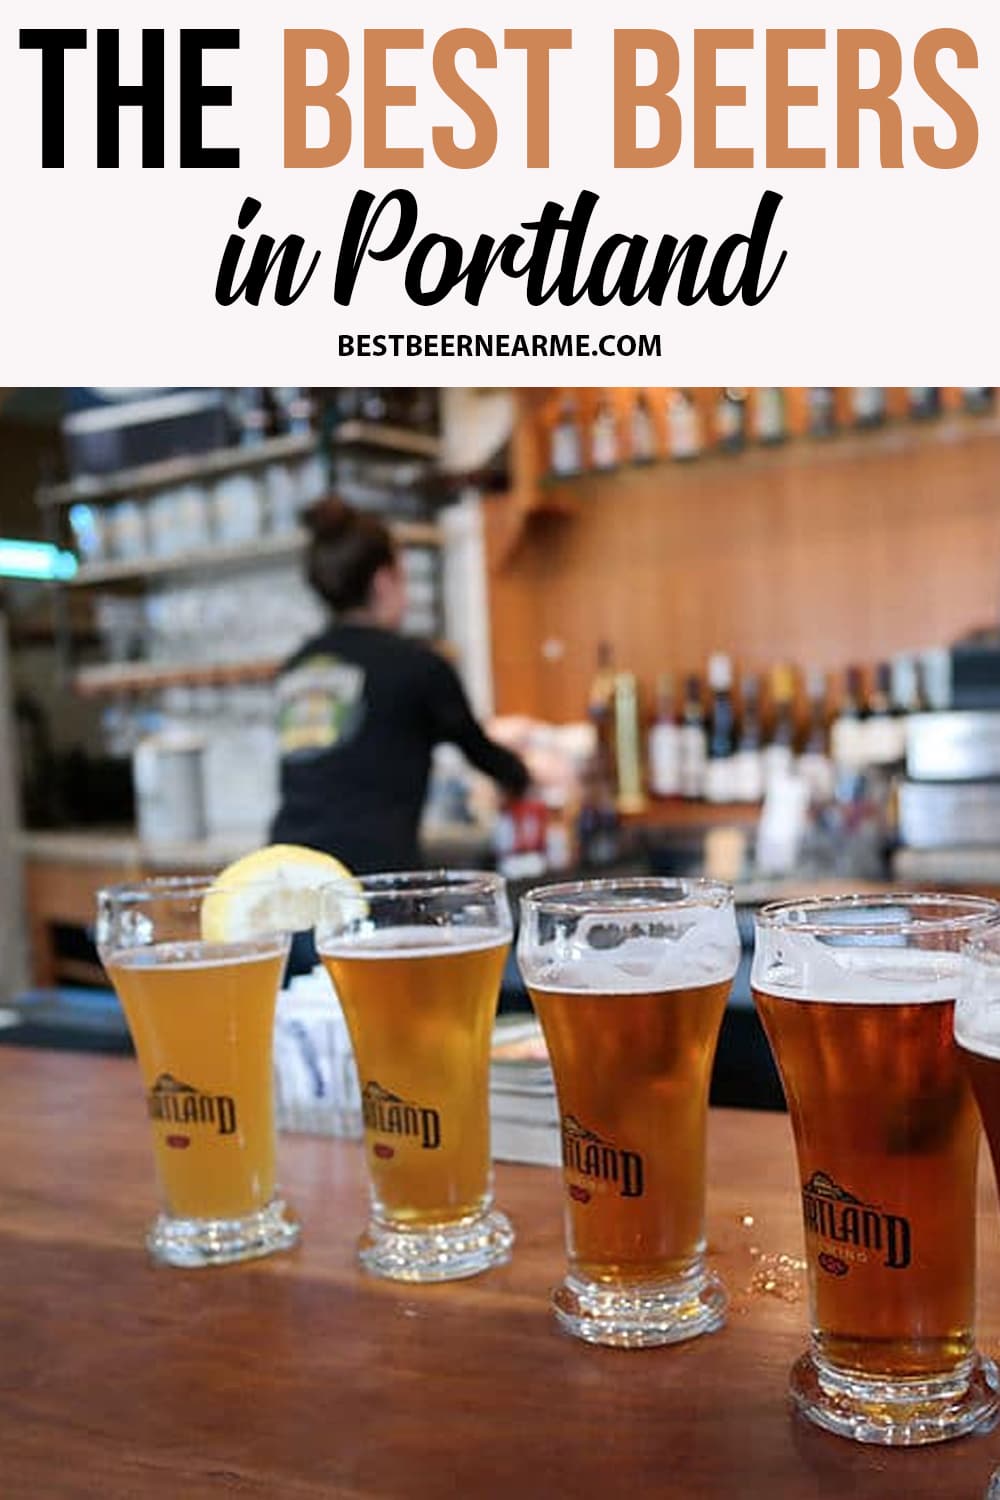 The Best Beers in Portland - Don't miss out - Best Beer Near Me